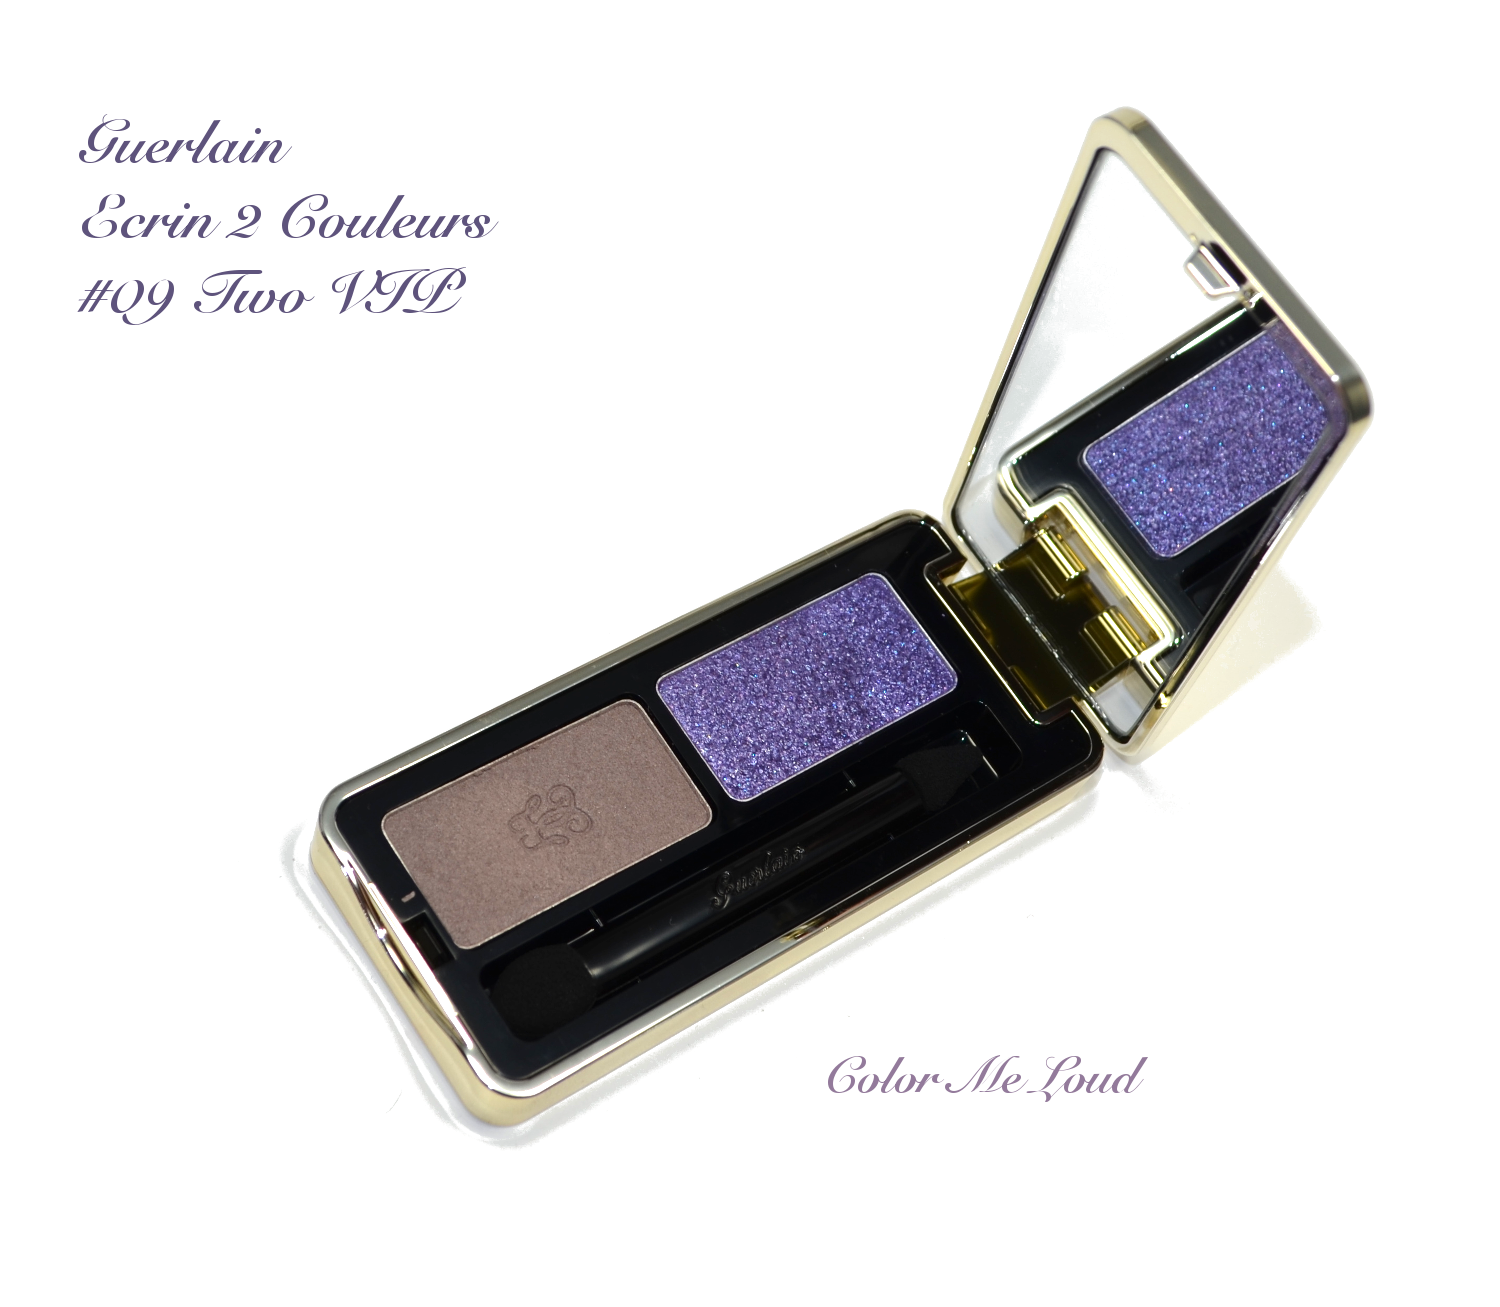 Guerlain Ecrin 2 Couleurs #09 Two VIP from Meteorites Blossom Collection for Spring 2014, Swatches & Review